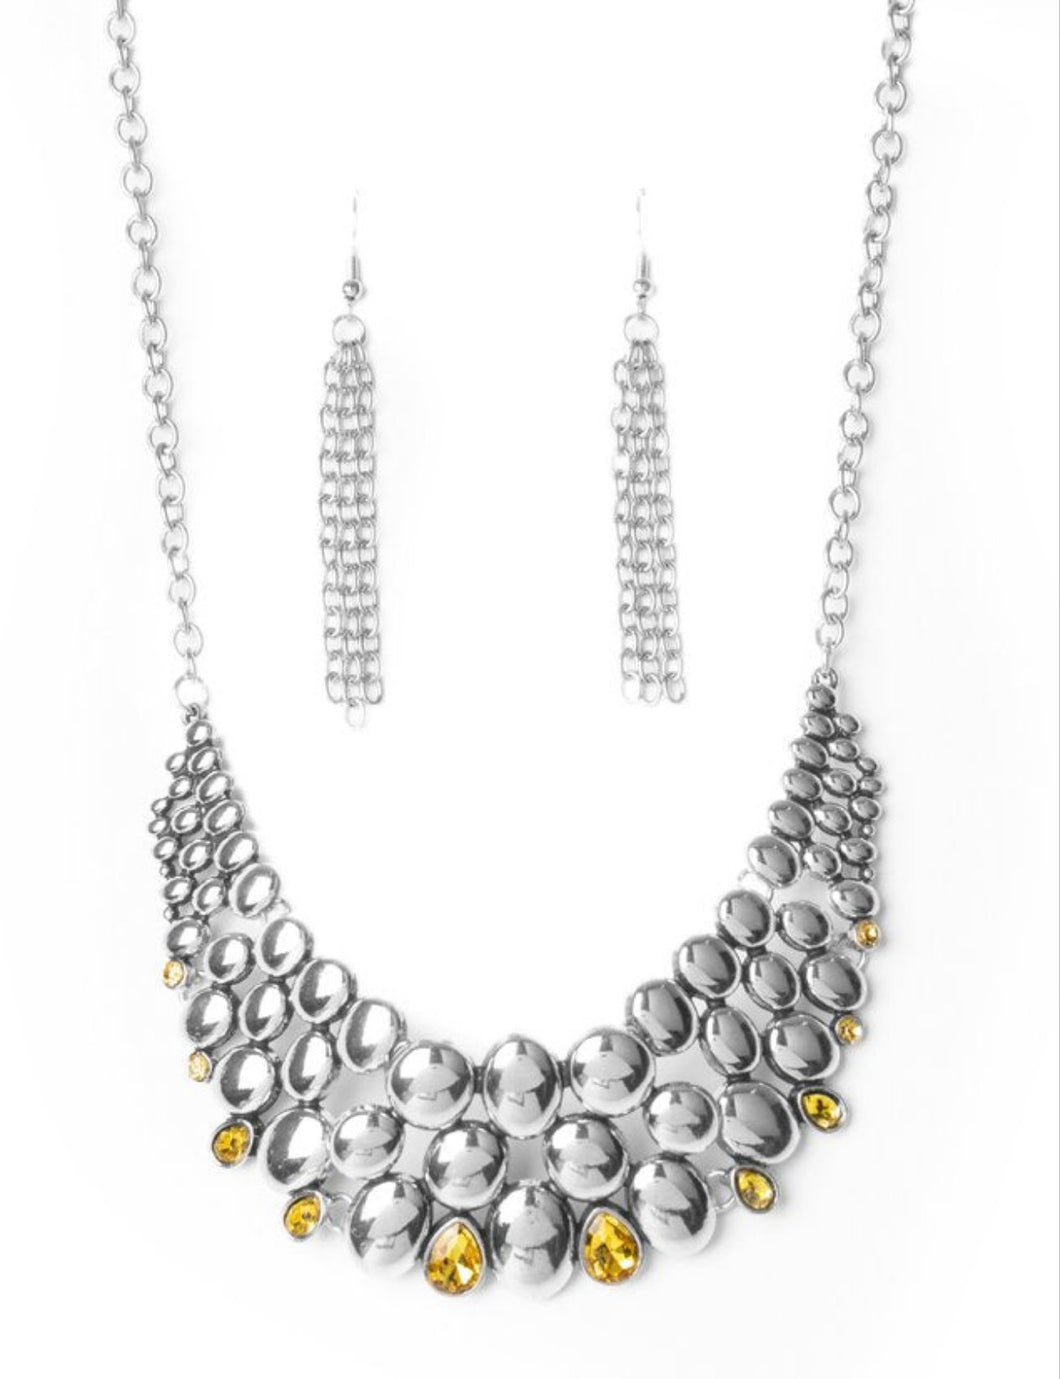 Powerhouse Party Silver and Yellow Necklace and Earrings